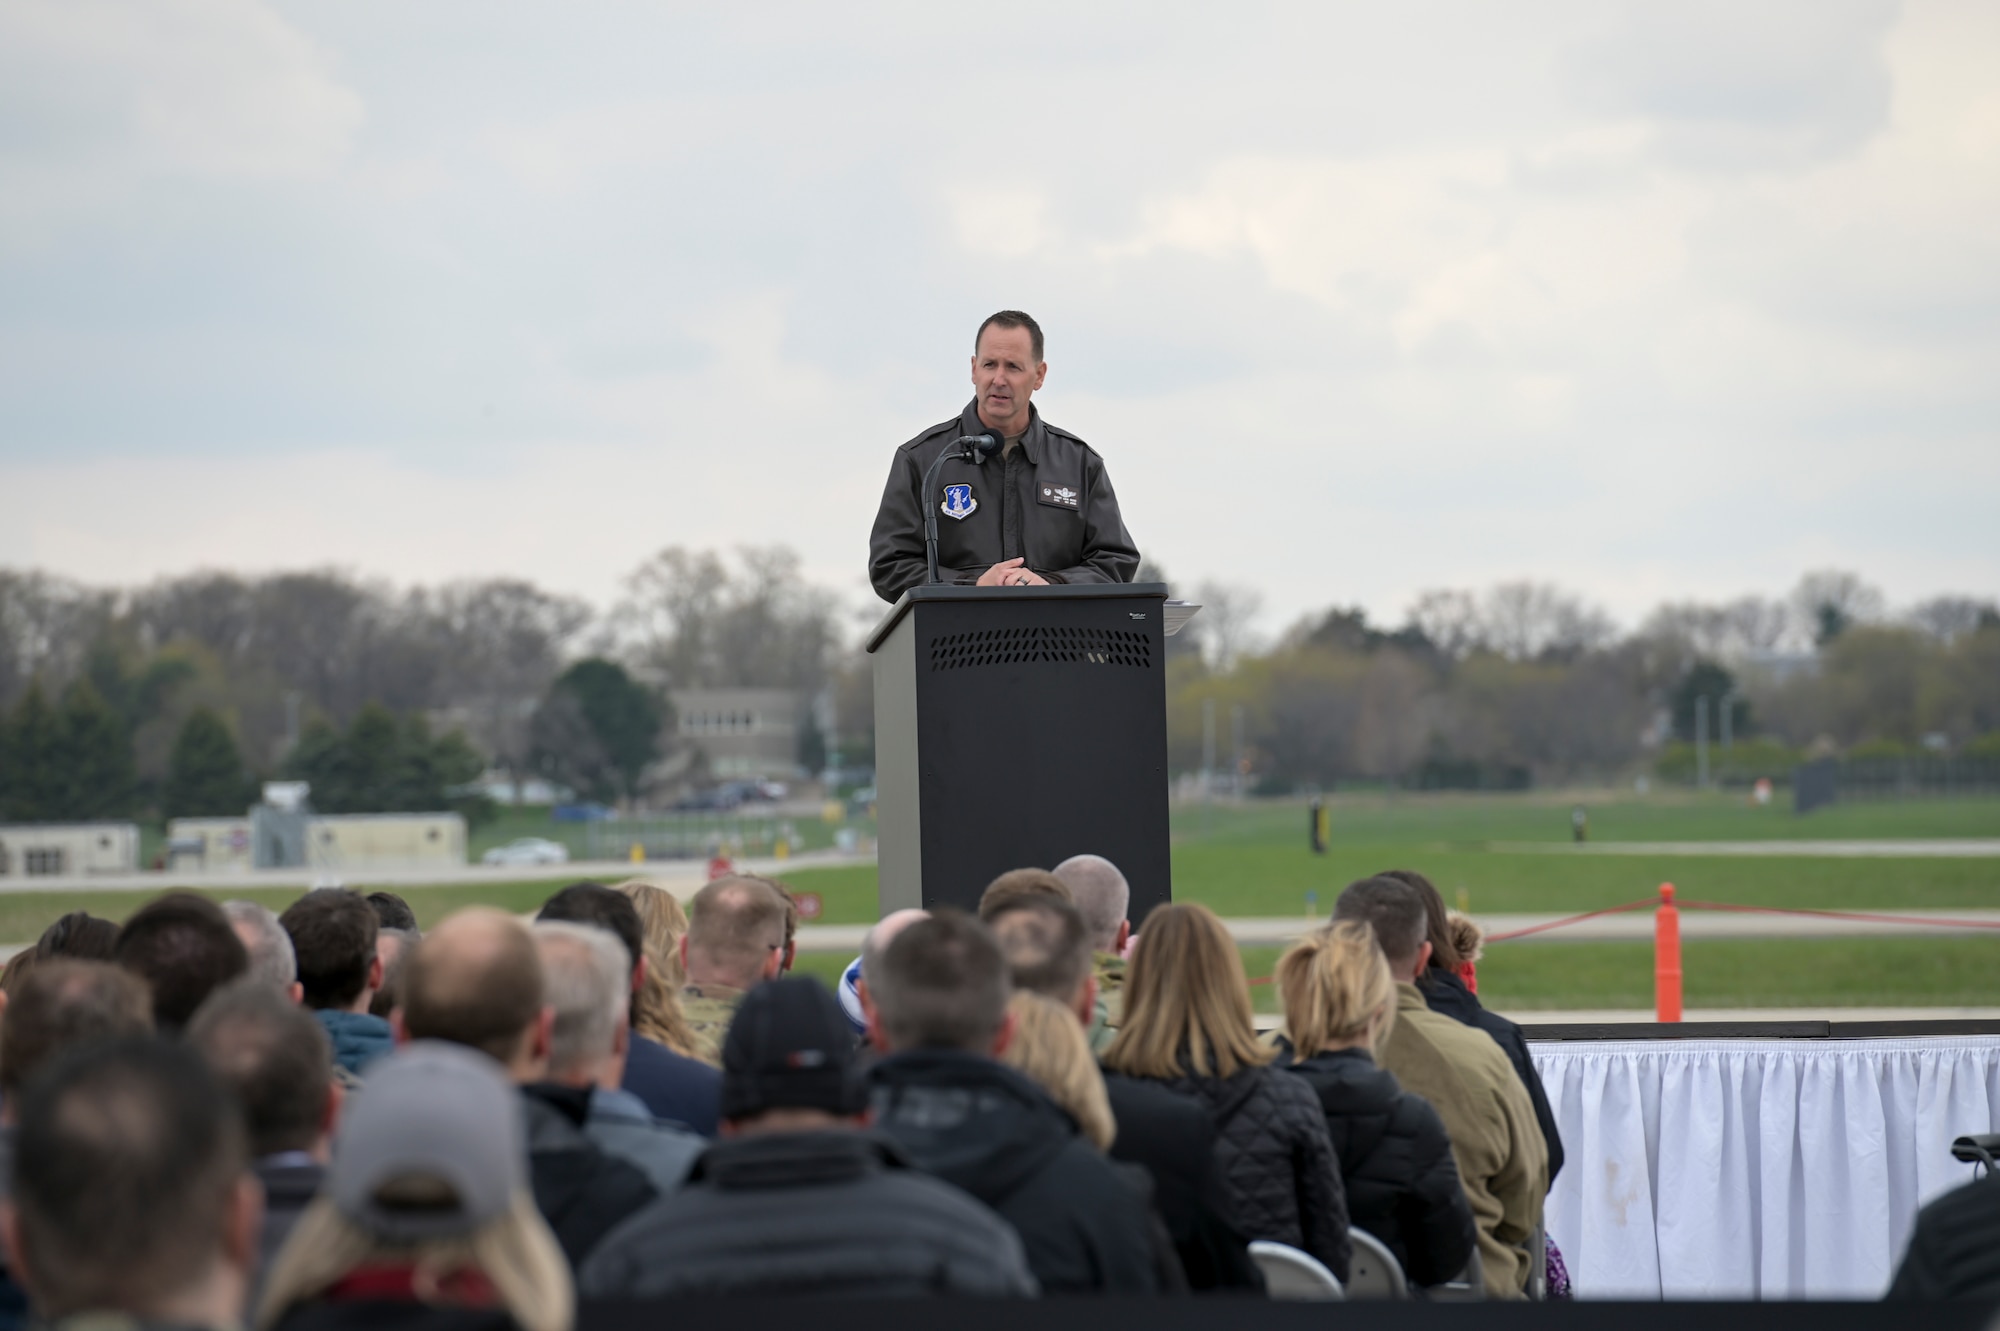 U.S. Air Force Col. Bart Van Roo, the commander of the Wisconsin Air National Guard's 115th Fighter Wing, addresses the audience Apr. 25, 2023, during an F-35 arrival ceremony at Truax Field in Madison, Wisconsin.